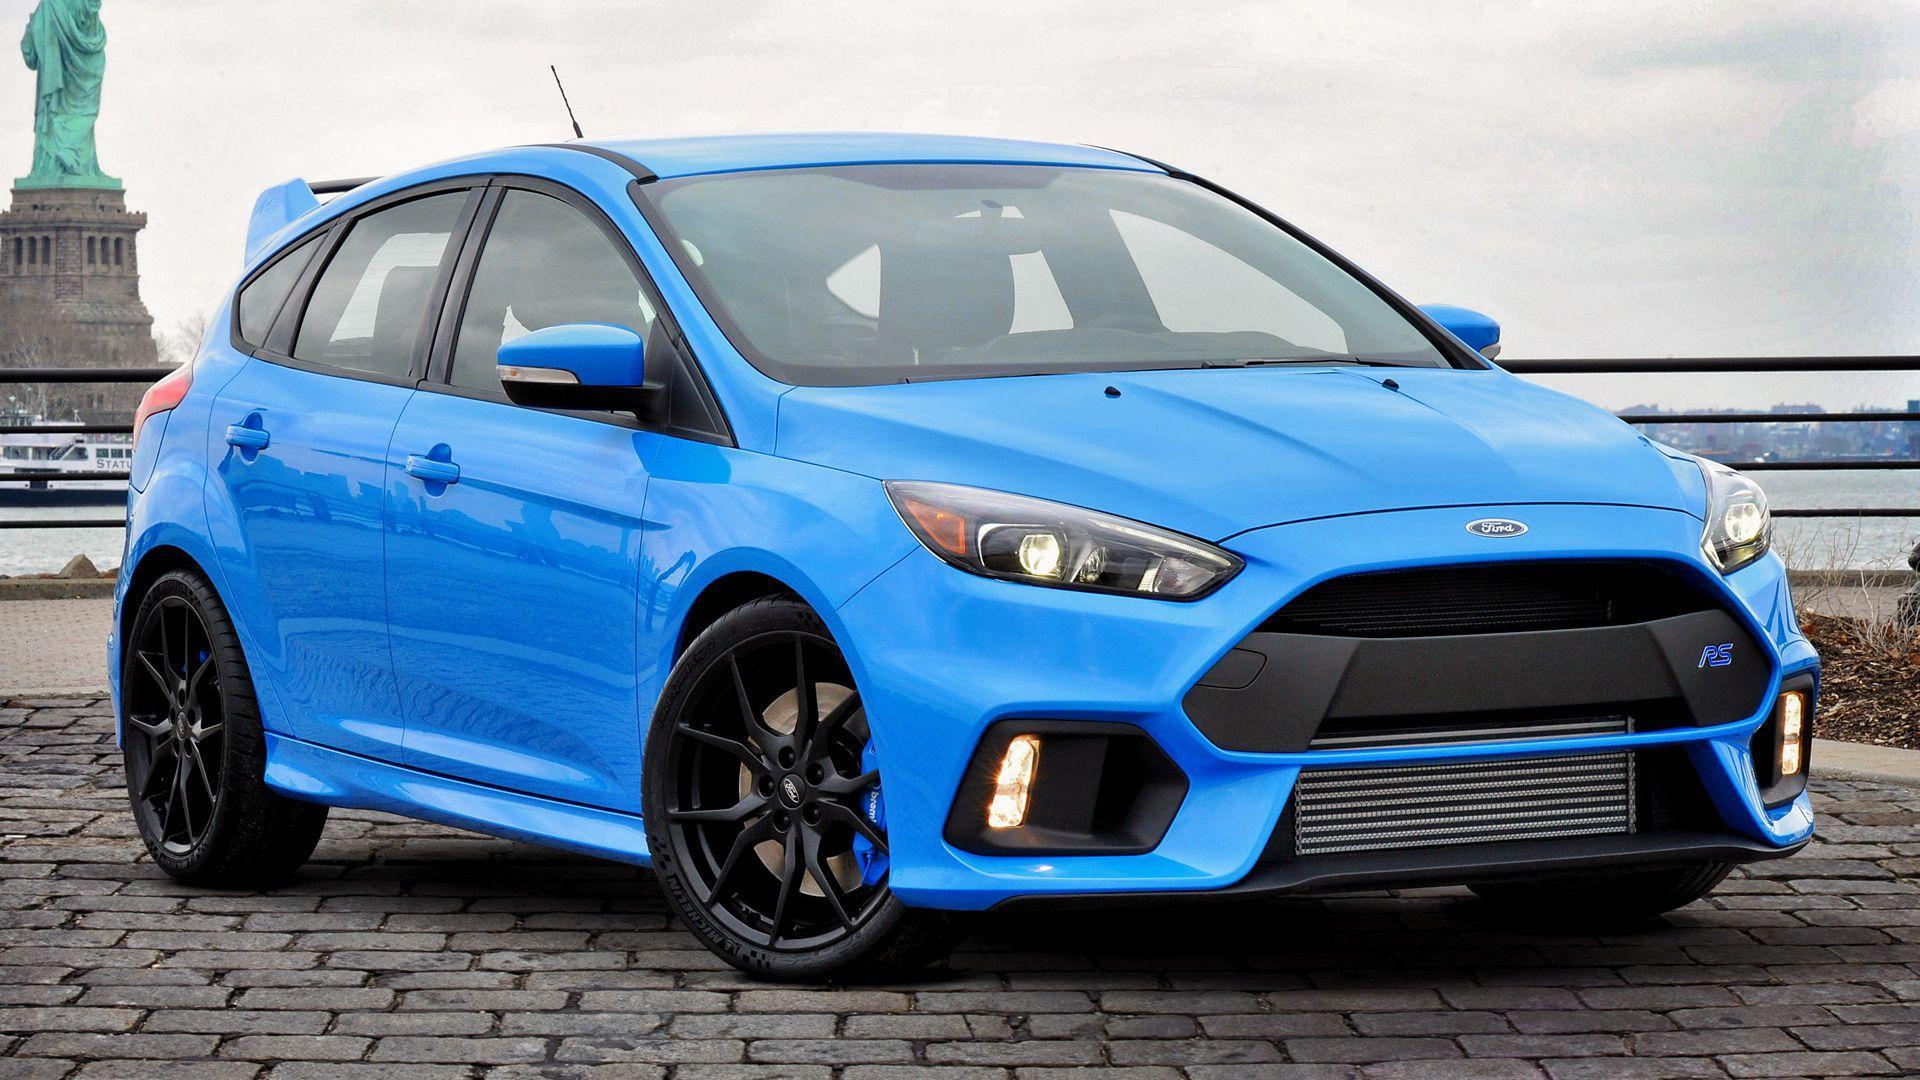 Ford Focus RS (2016) US Wallpaper and HD Image